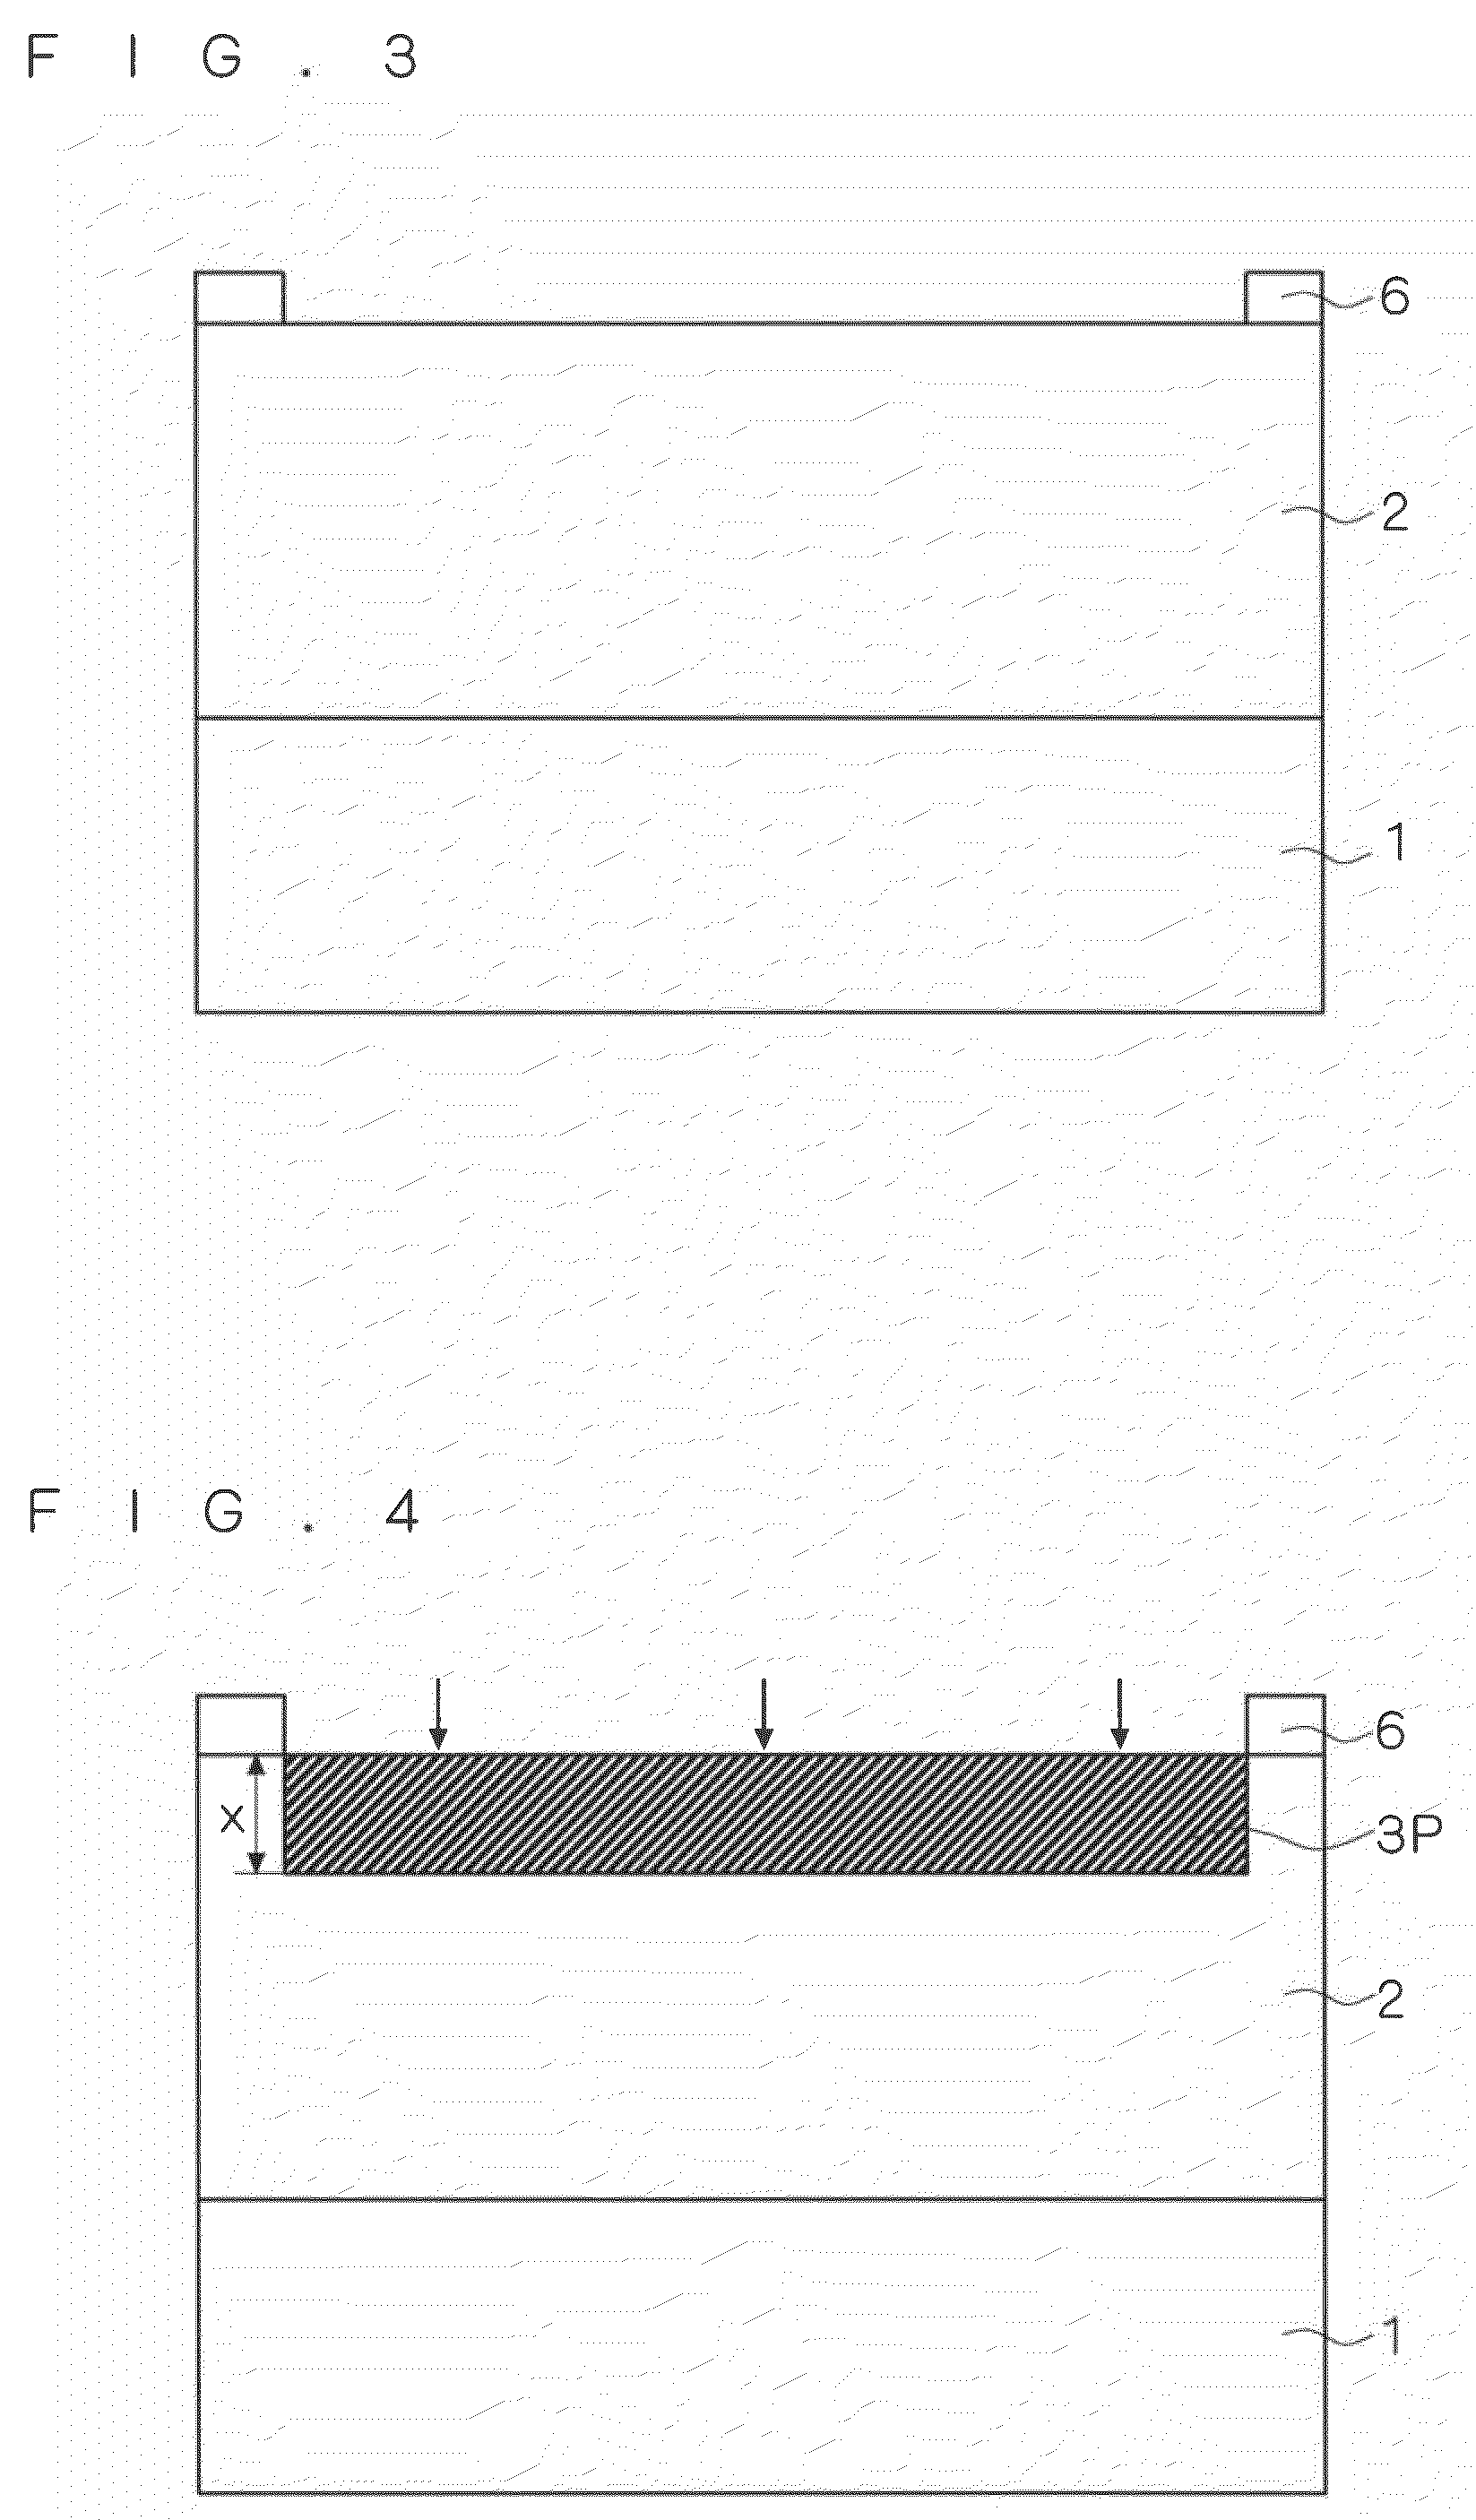 Silicon carbide semiconductor device comprising silicon carbide layer and method of manufacturing the same